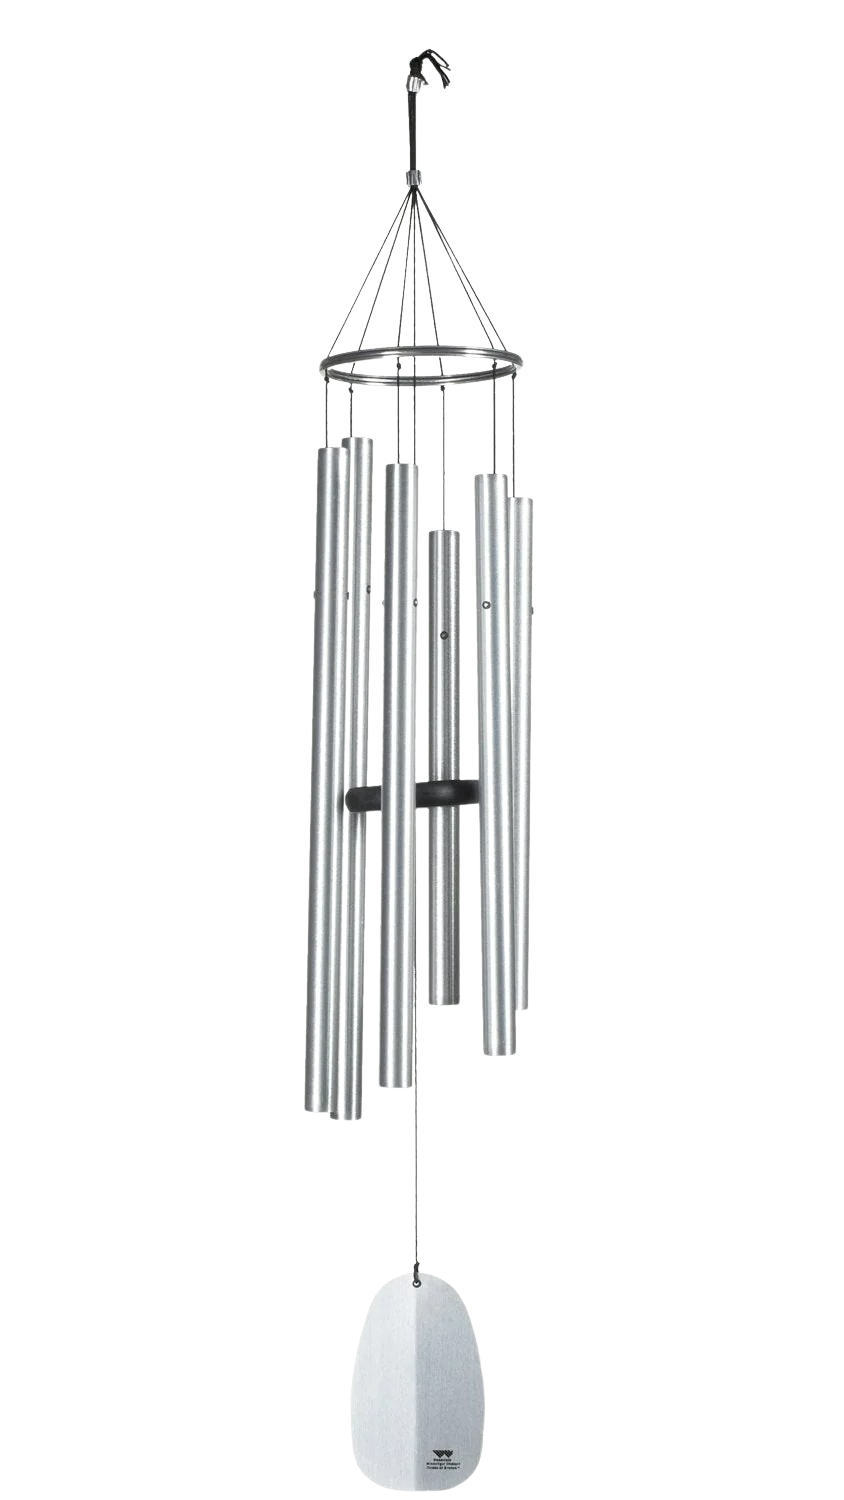 Artists/Images/woodstock chimes_image_chimes of athena_silber.png